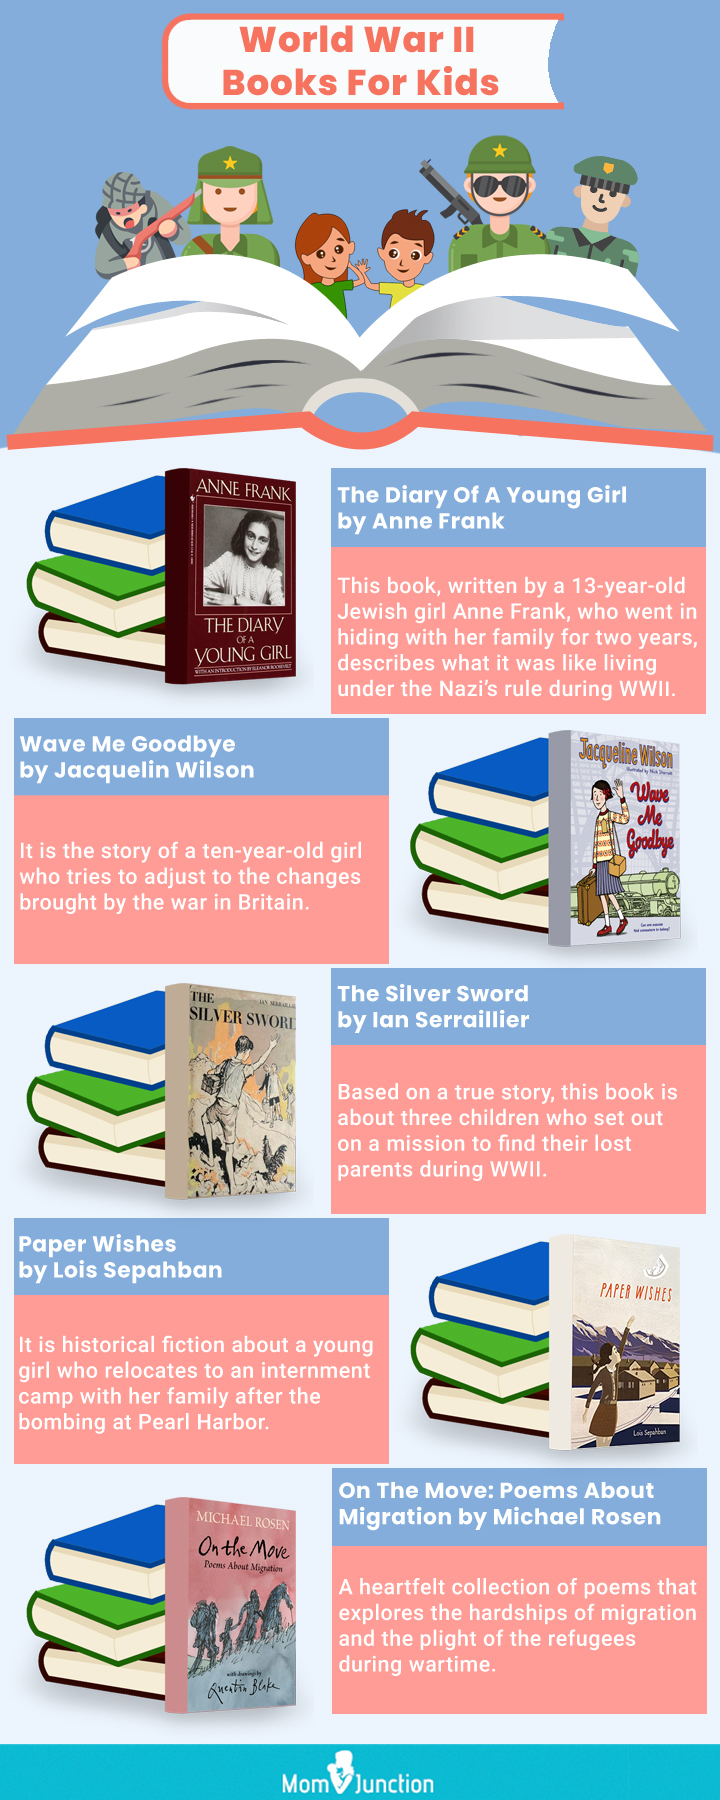 world war II facts for kids [infographic]